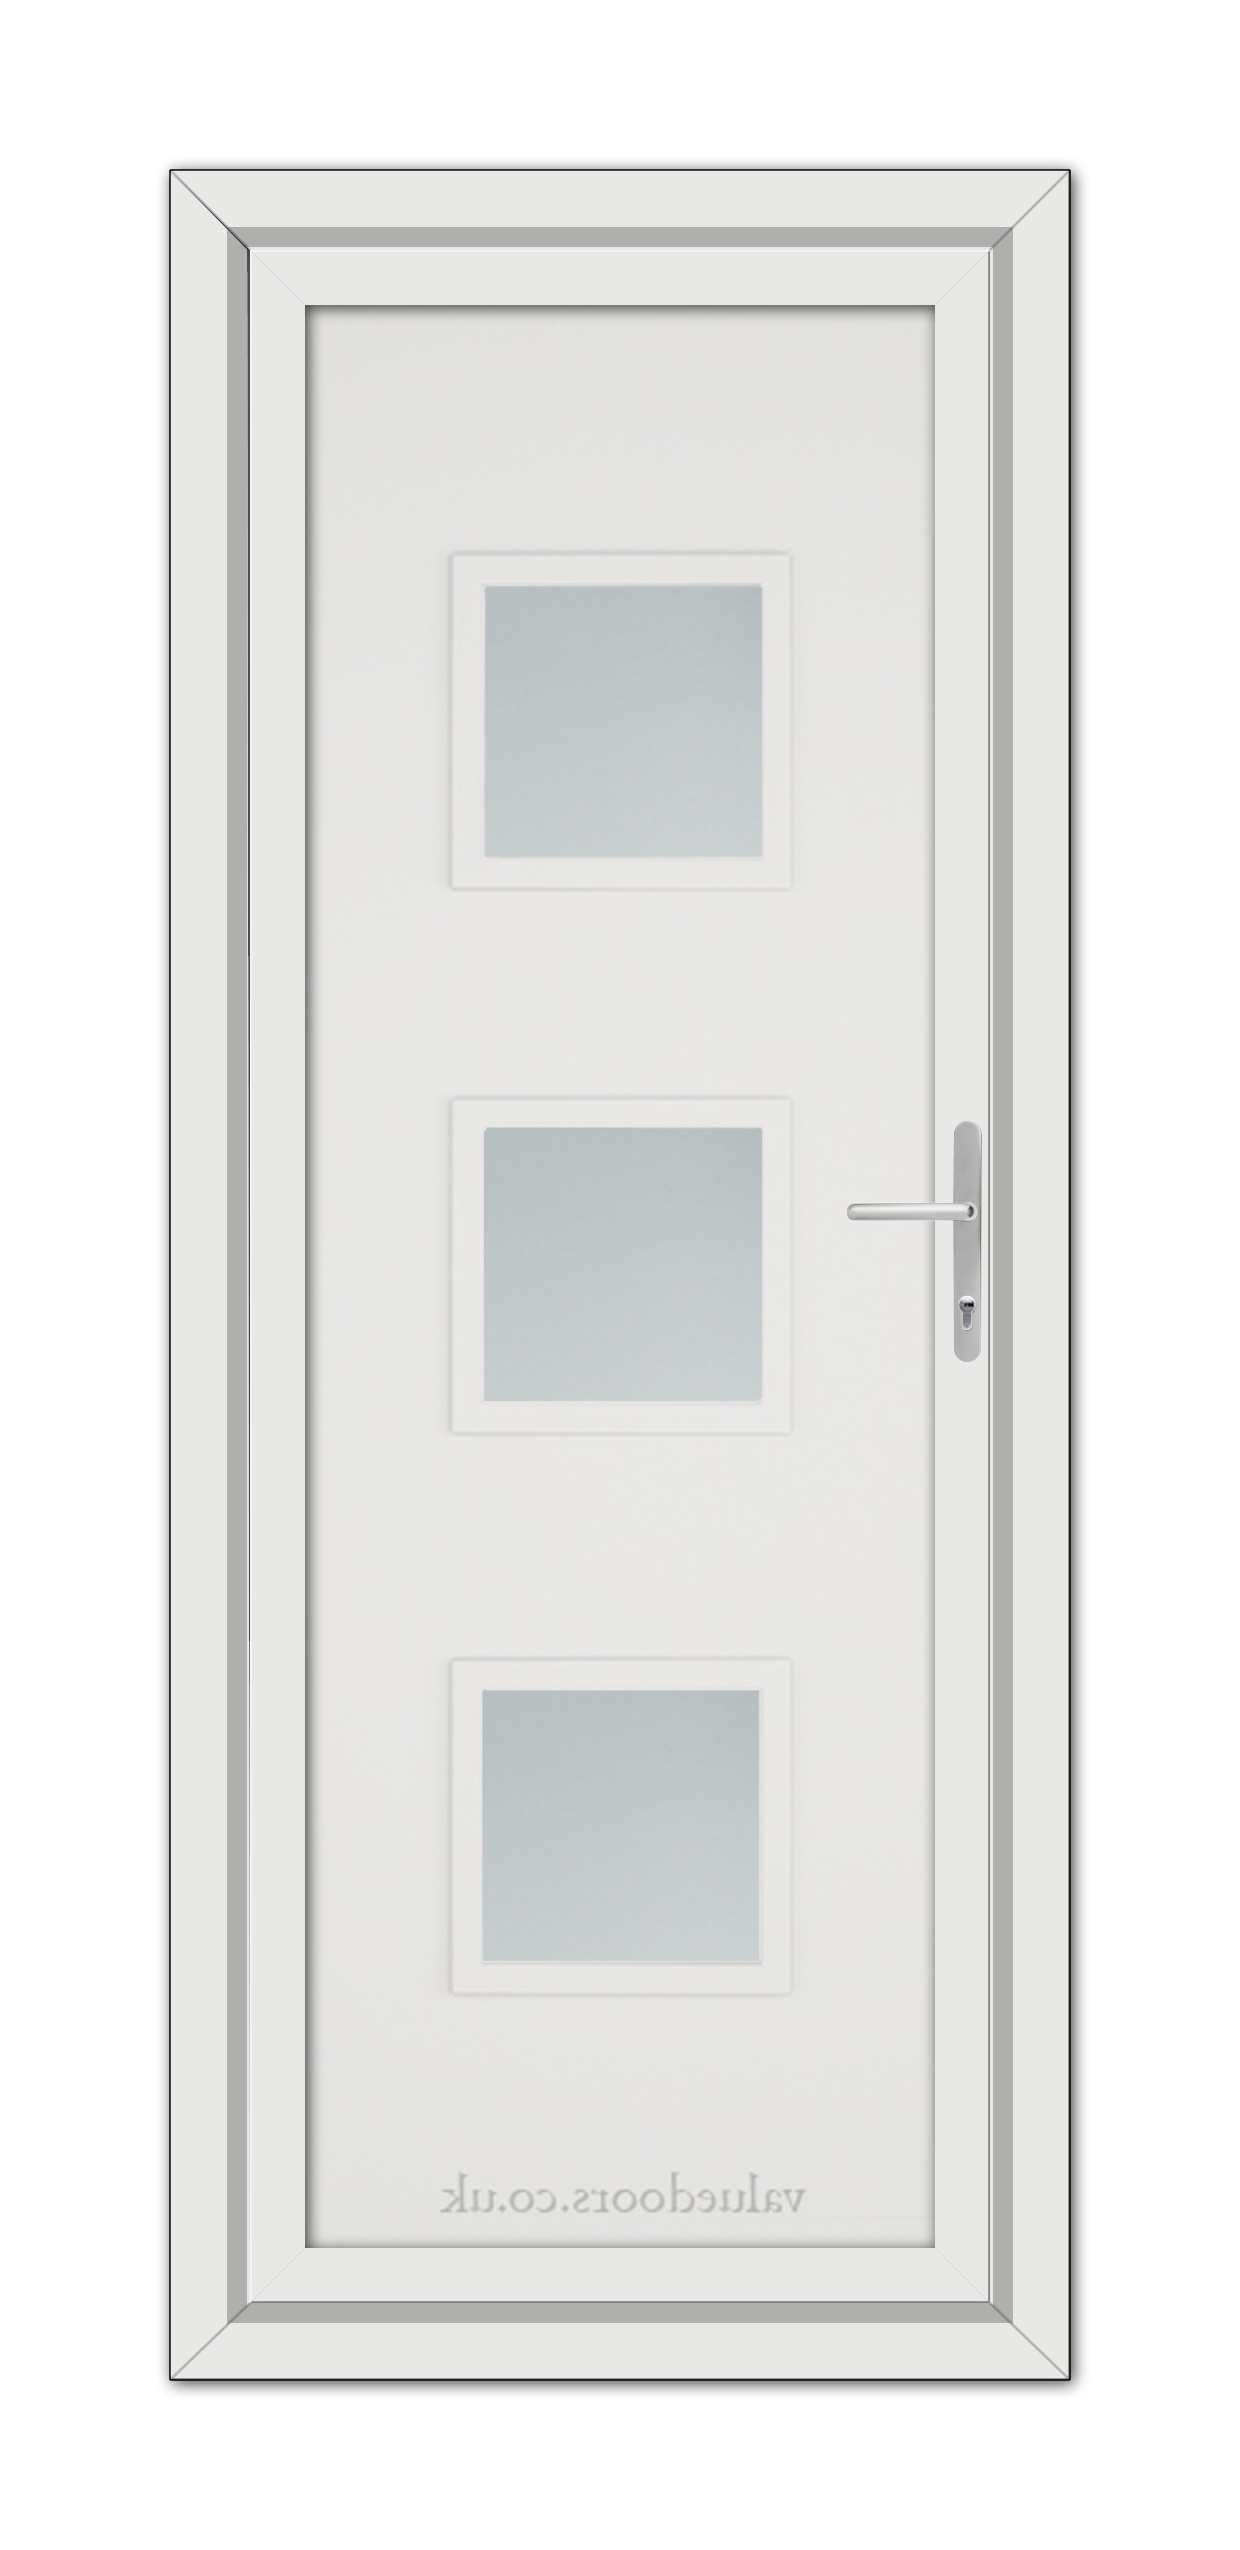 A White Modern 5013 uPVC Door featuring three frosted glass panels and a metallic handle, framed in white.